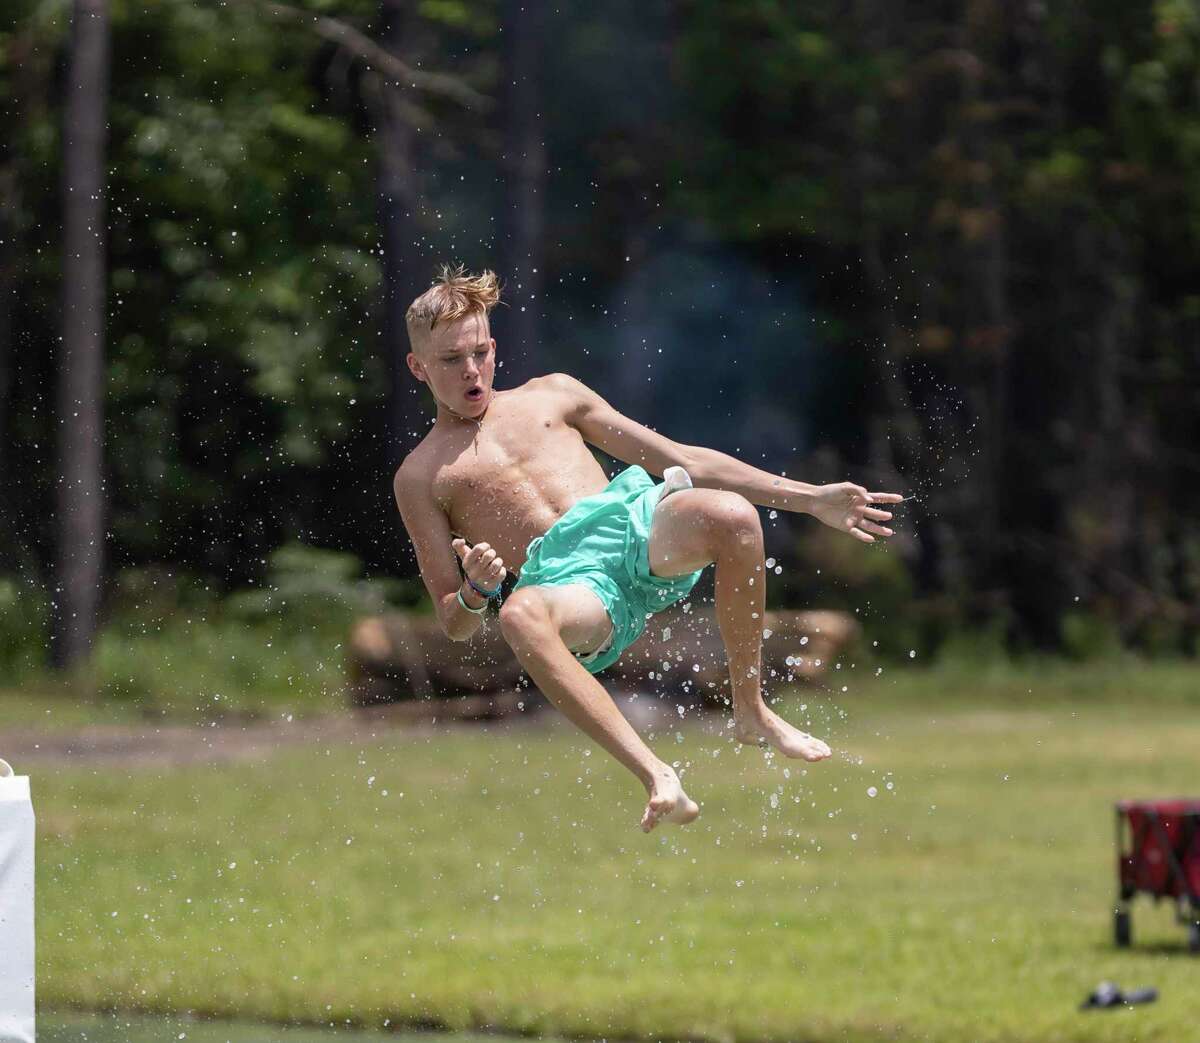 A boy prepares to land in a lake at Chadillac’s Ranch in Conroe after sliding off a water slide, Sunday, May 24, 2020. Chadillac’s Ranch postponed their usual Spring Break opening until Memorial Day weekend with restrictions.